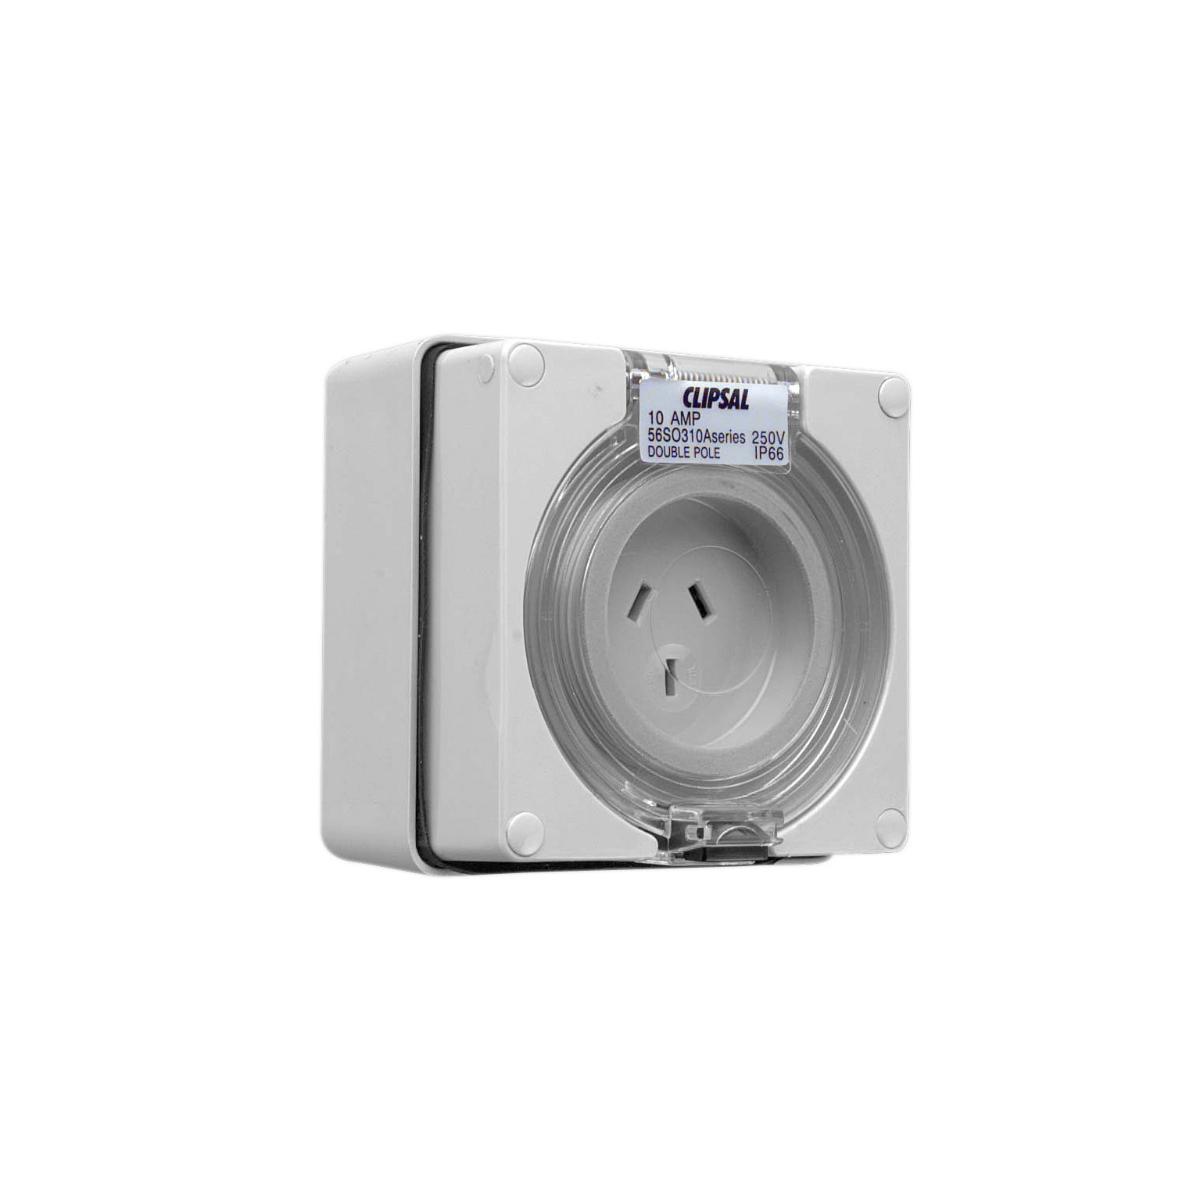 OUTLET SOCKET IP66 3PIN 10A 250V D/P GRY